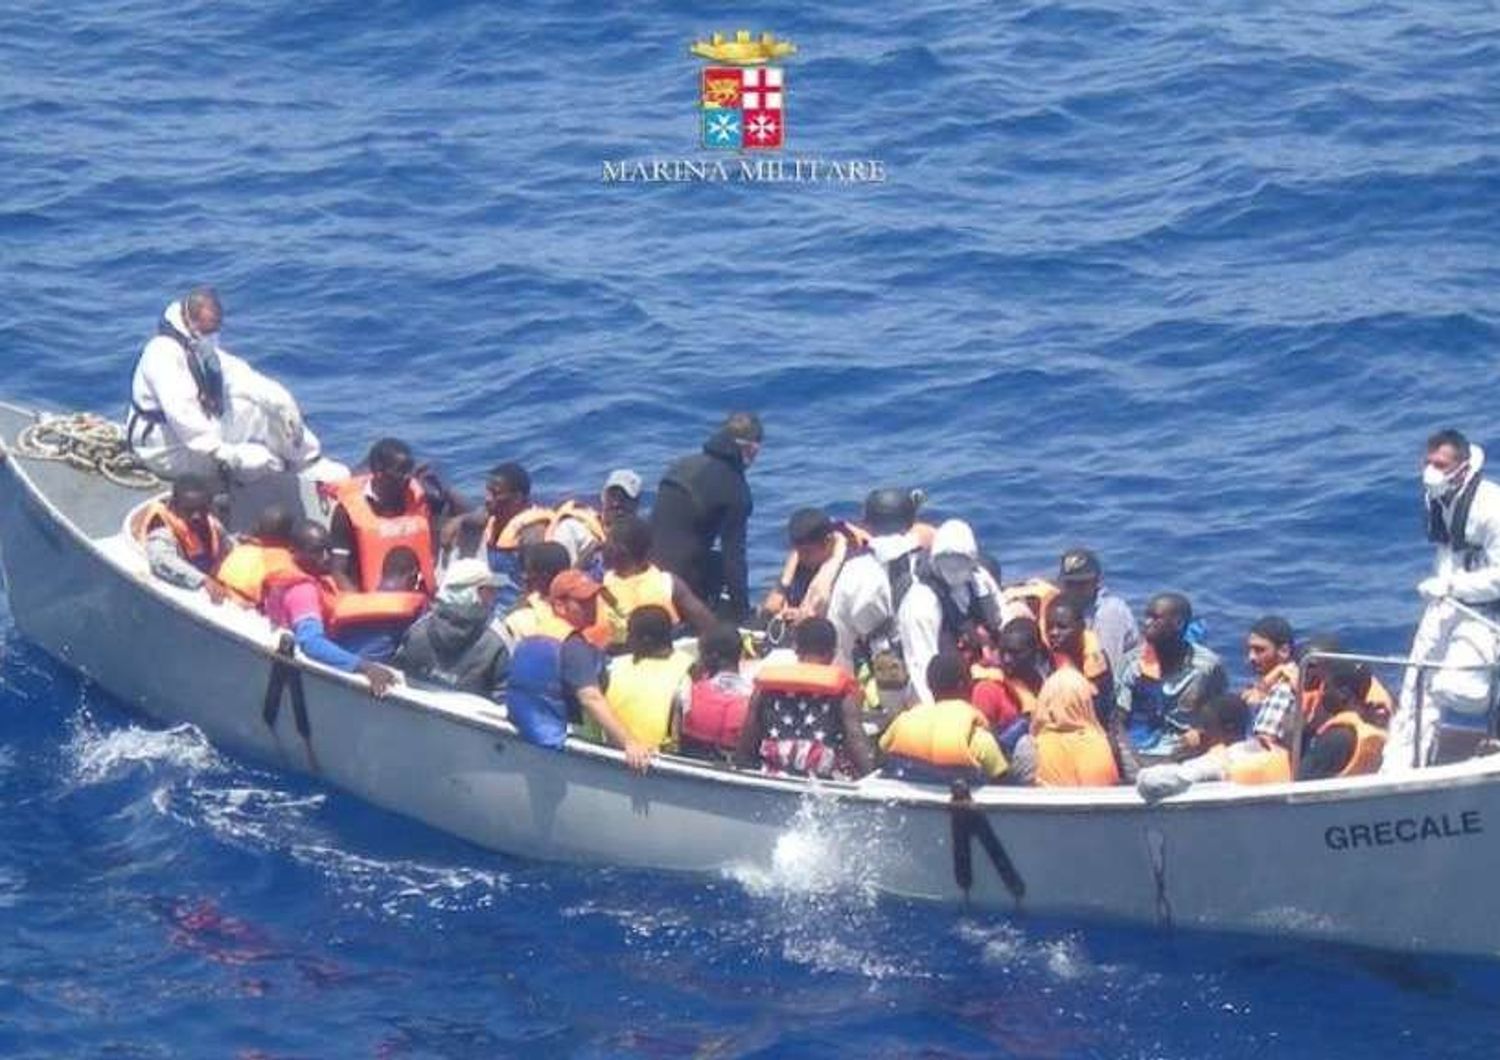 Europe to help Italy manage migrant flows